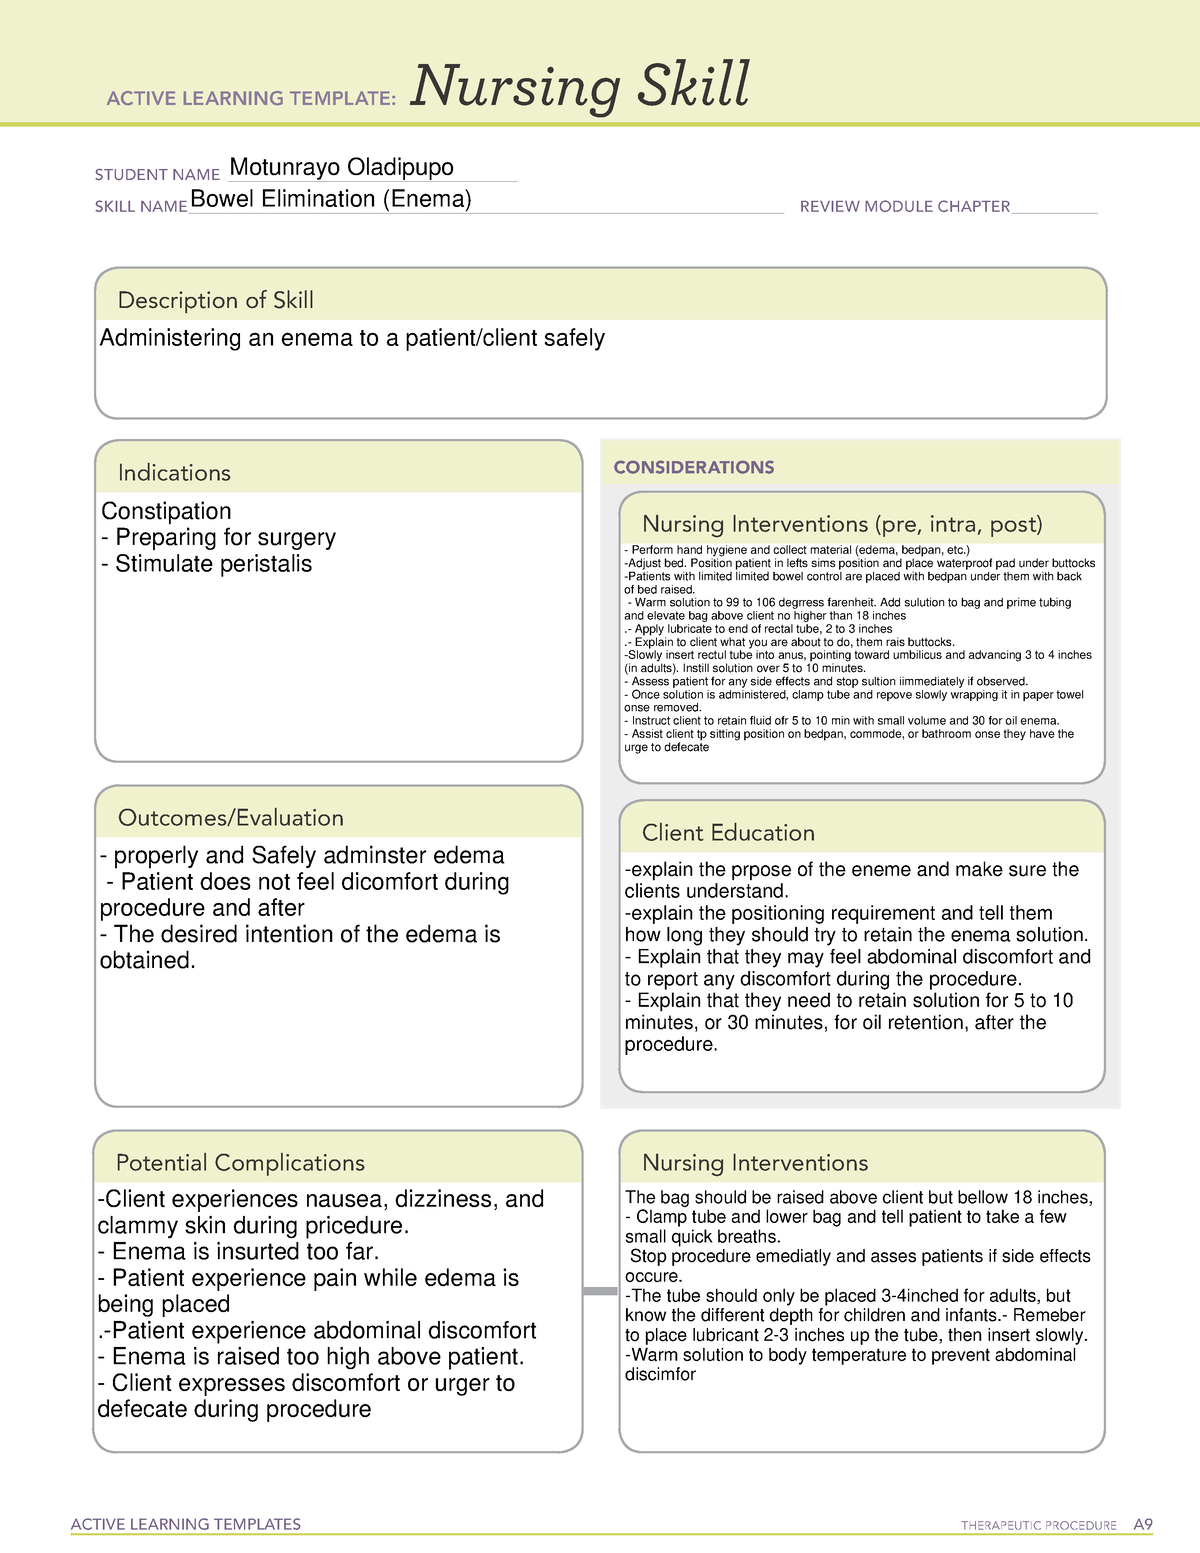 Bowel elimination for adult ACTIVE LEARNING TEMPLATES THERAPEUTIC